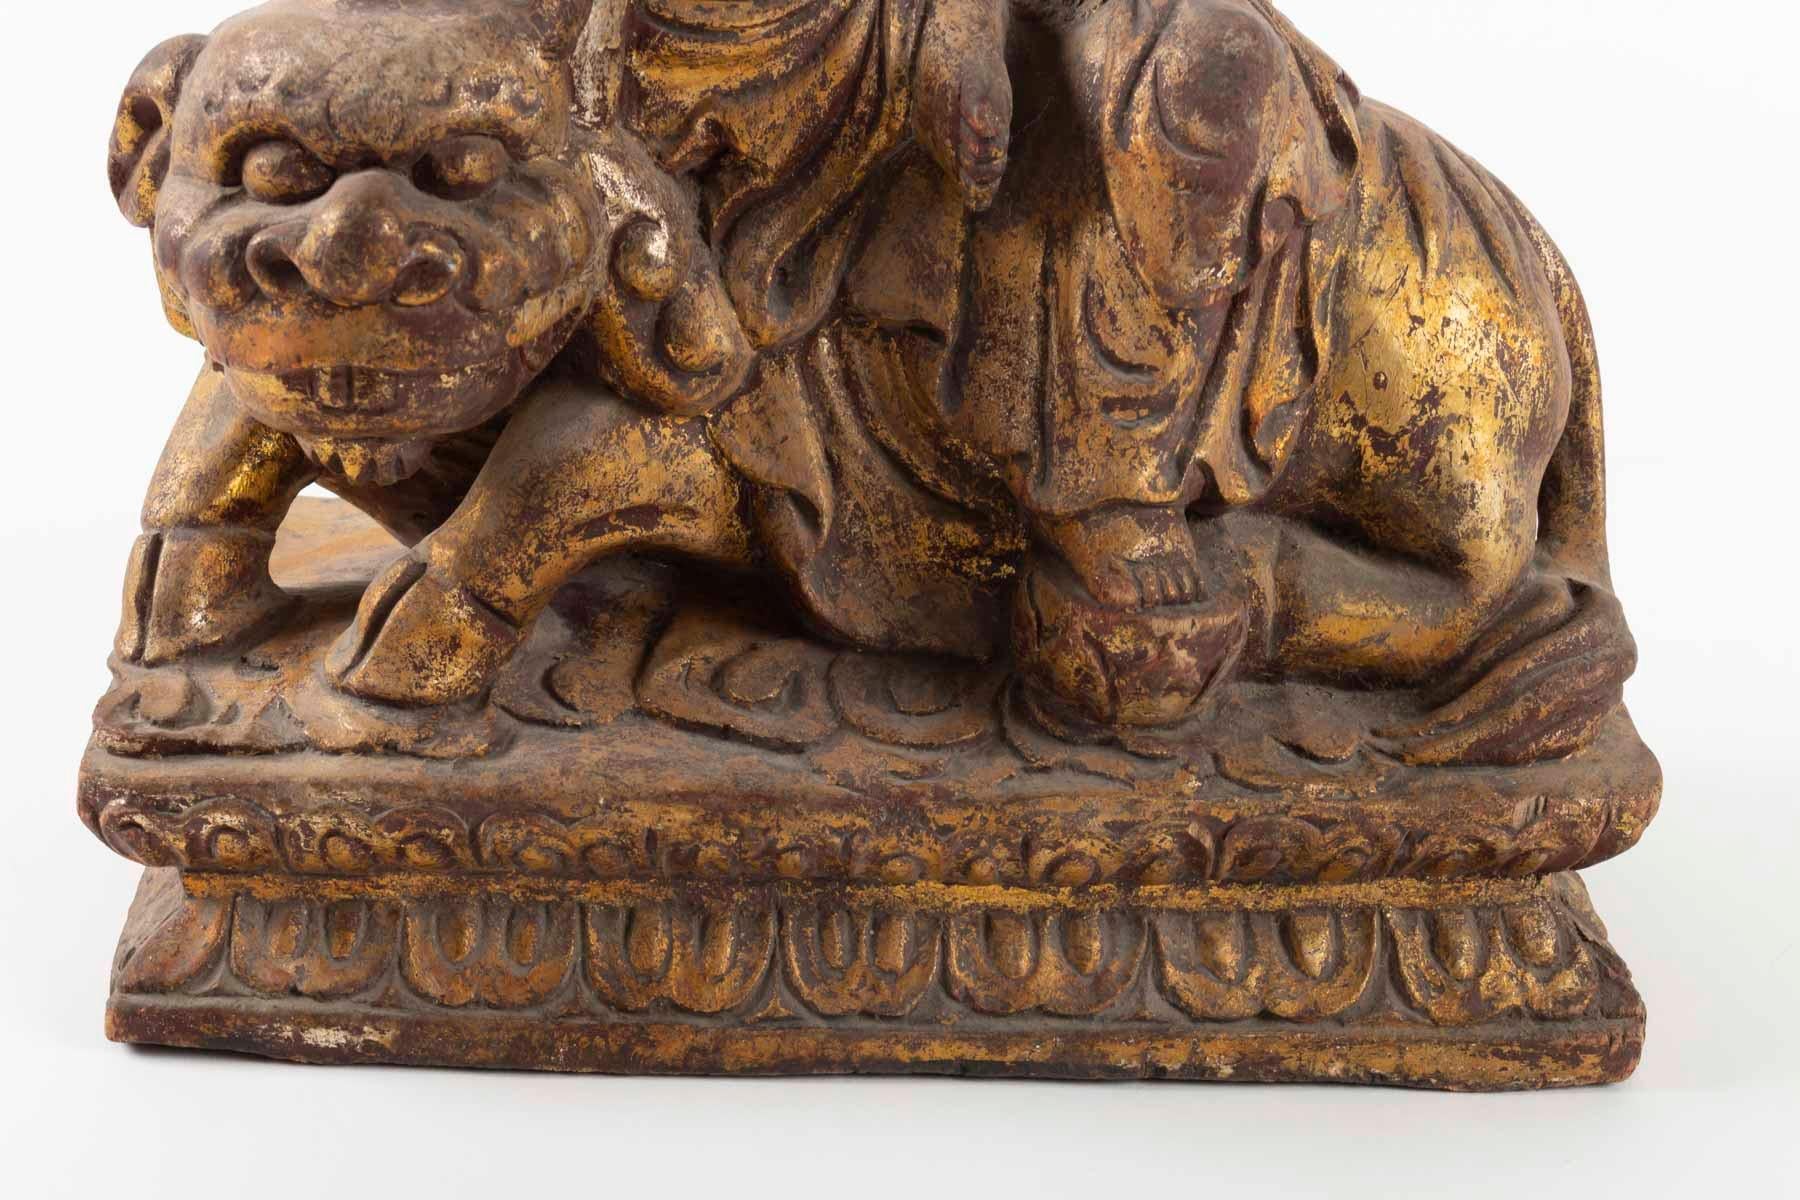 Chinese Golden Wooden Buddhist Deity, Seated on a Lion, China, Late 19th Century